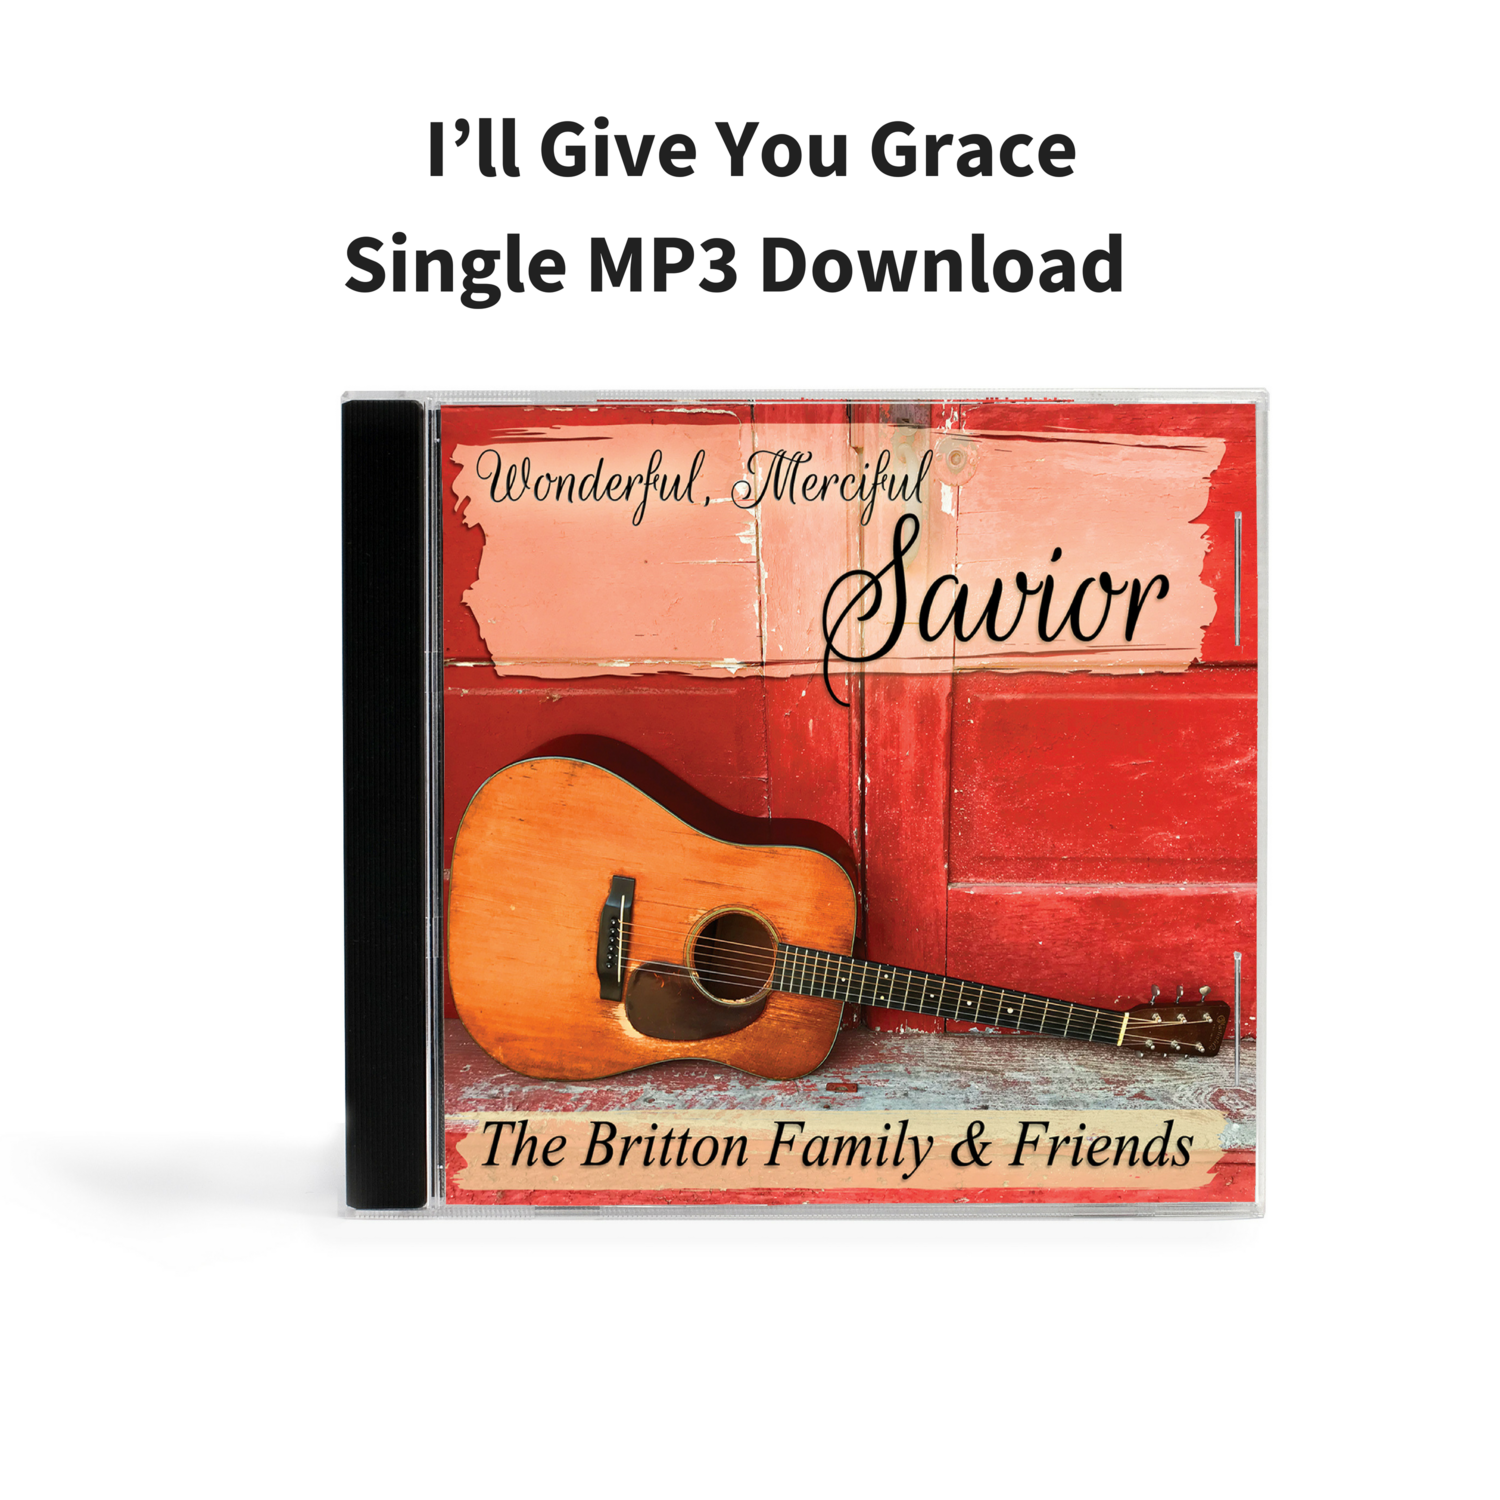 I’ll Give You Grace - Single MP3 Download